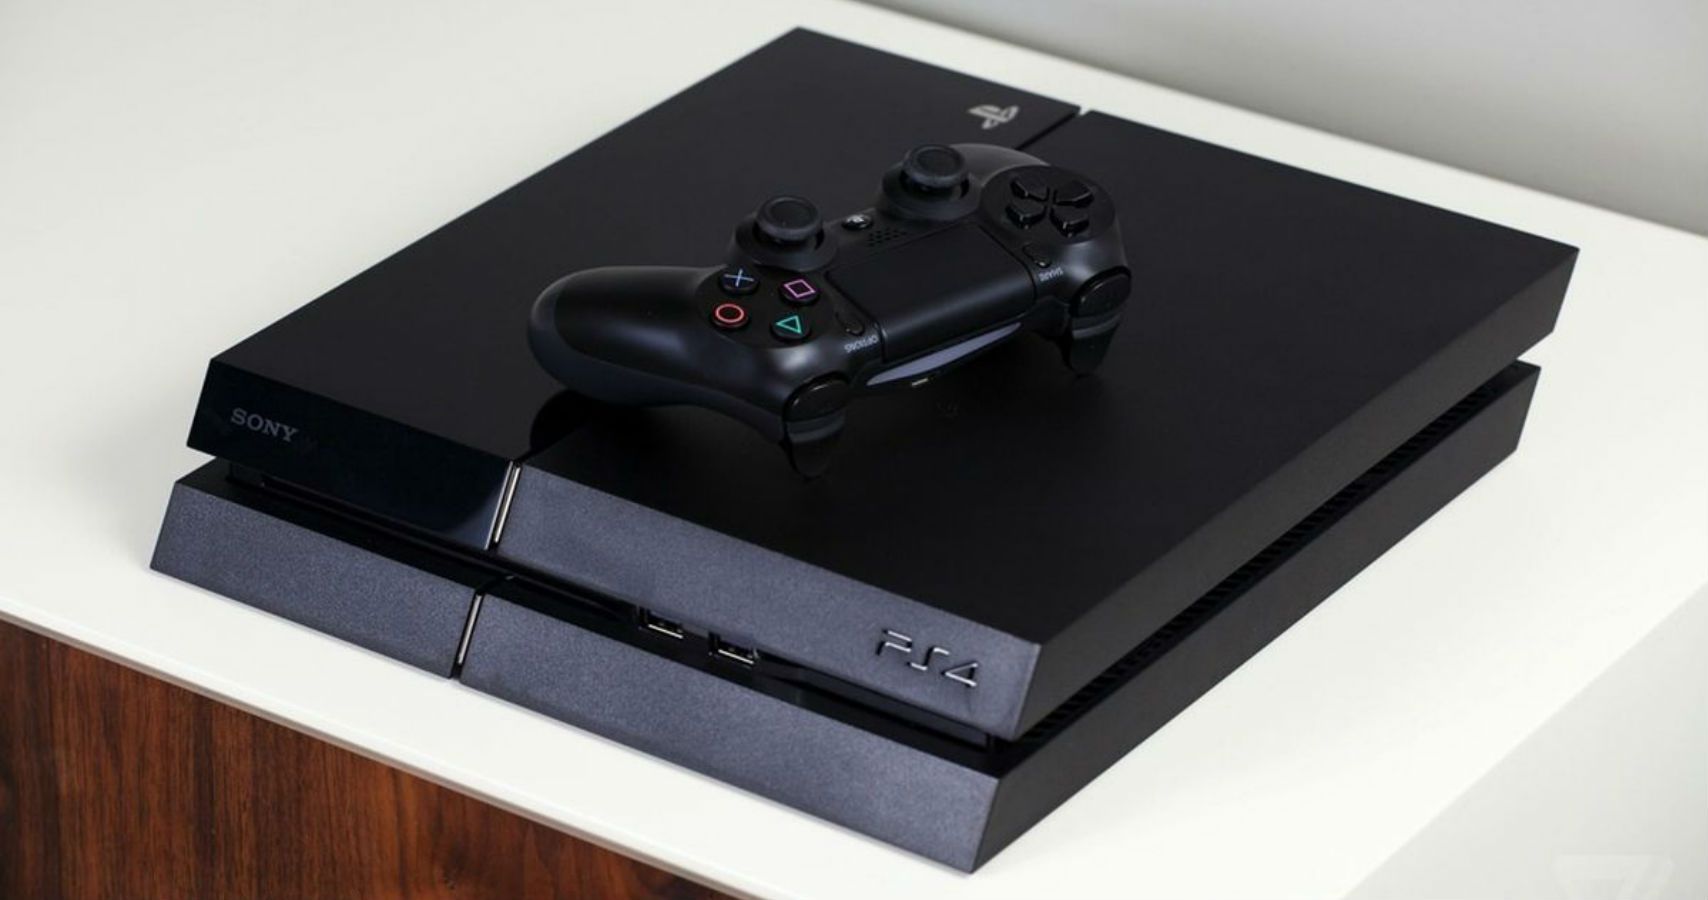 Sony Confirms All But One PS4 Model Has Been Discontinued In Japan